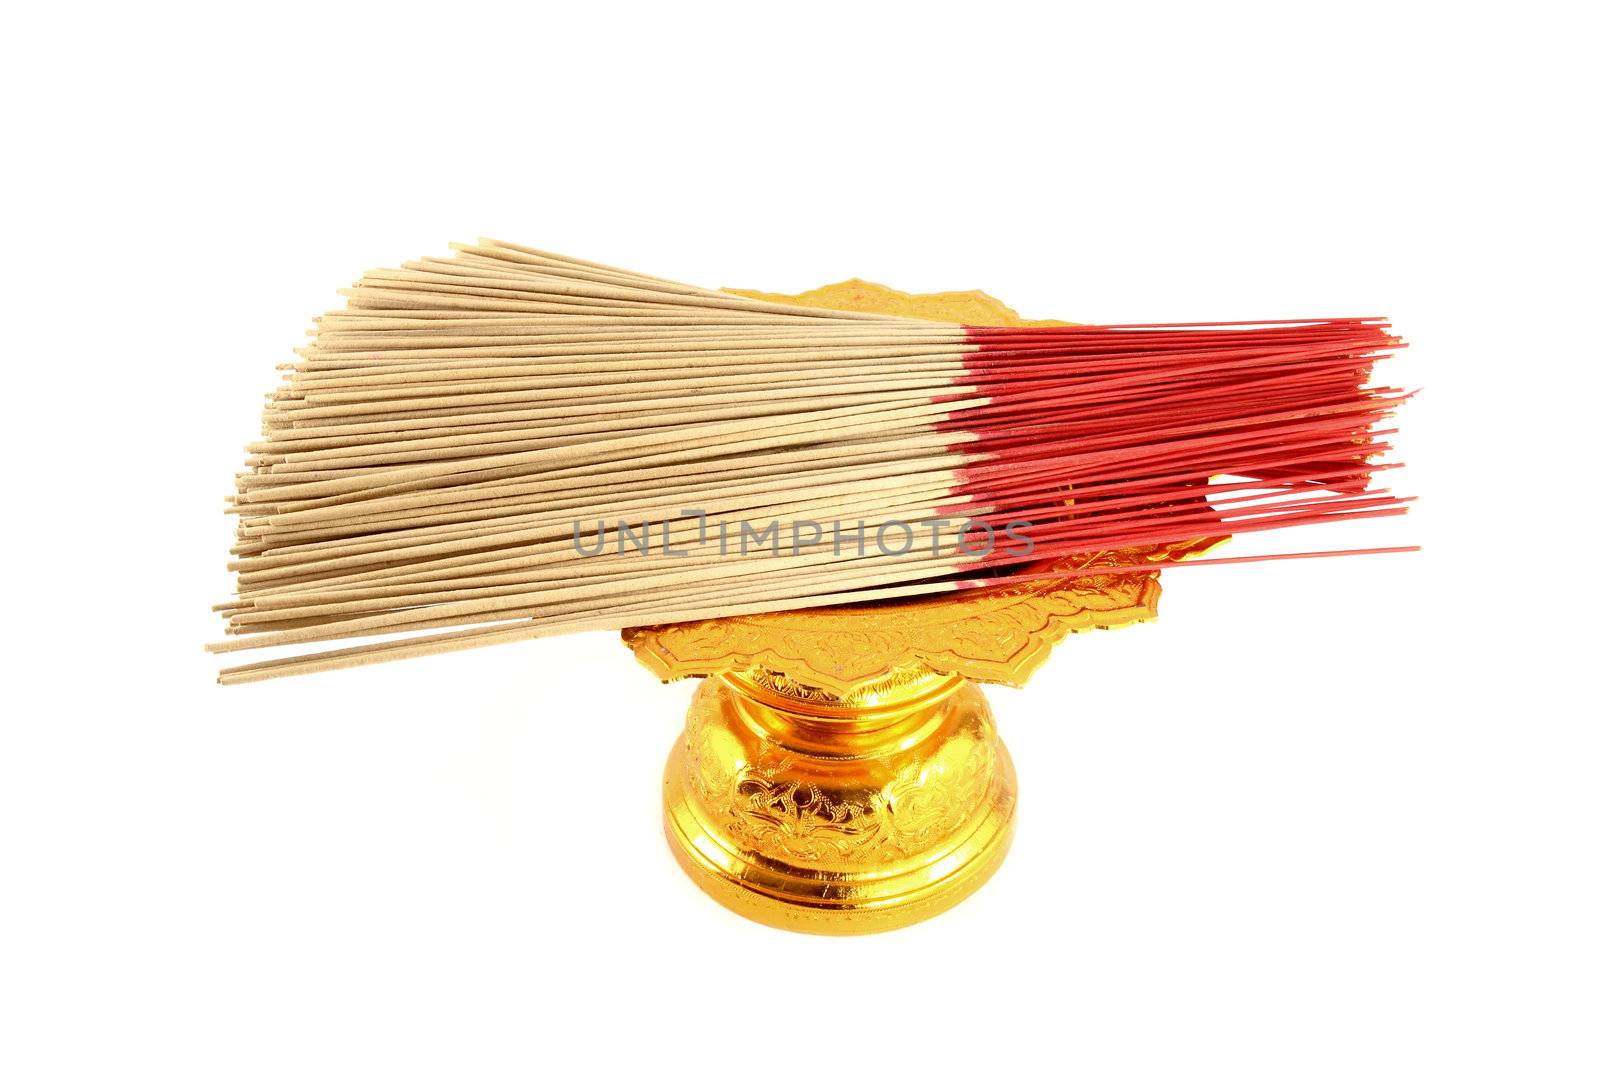 incense on golden tray on white background